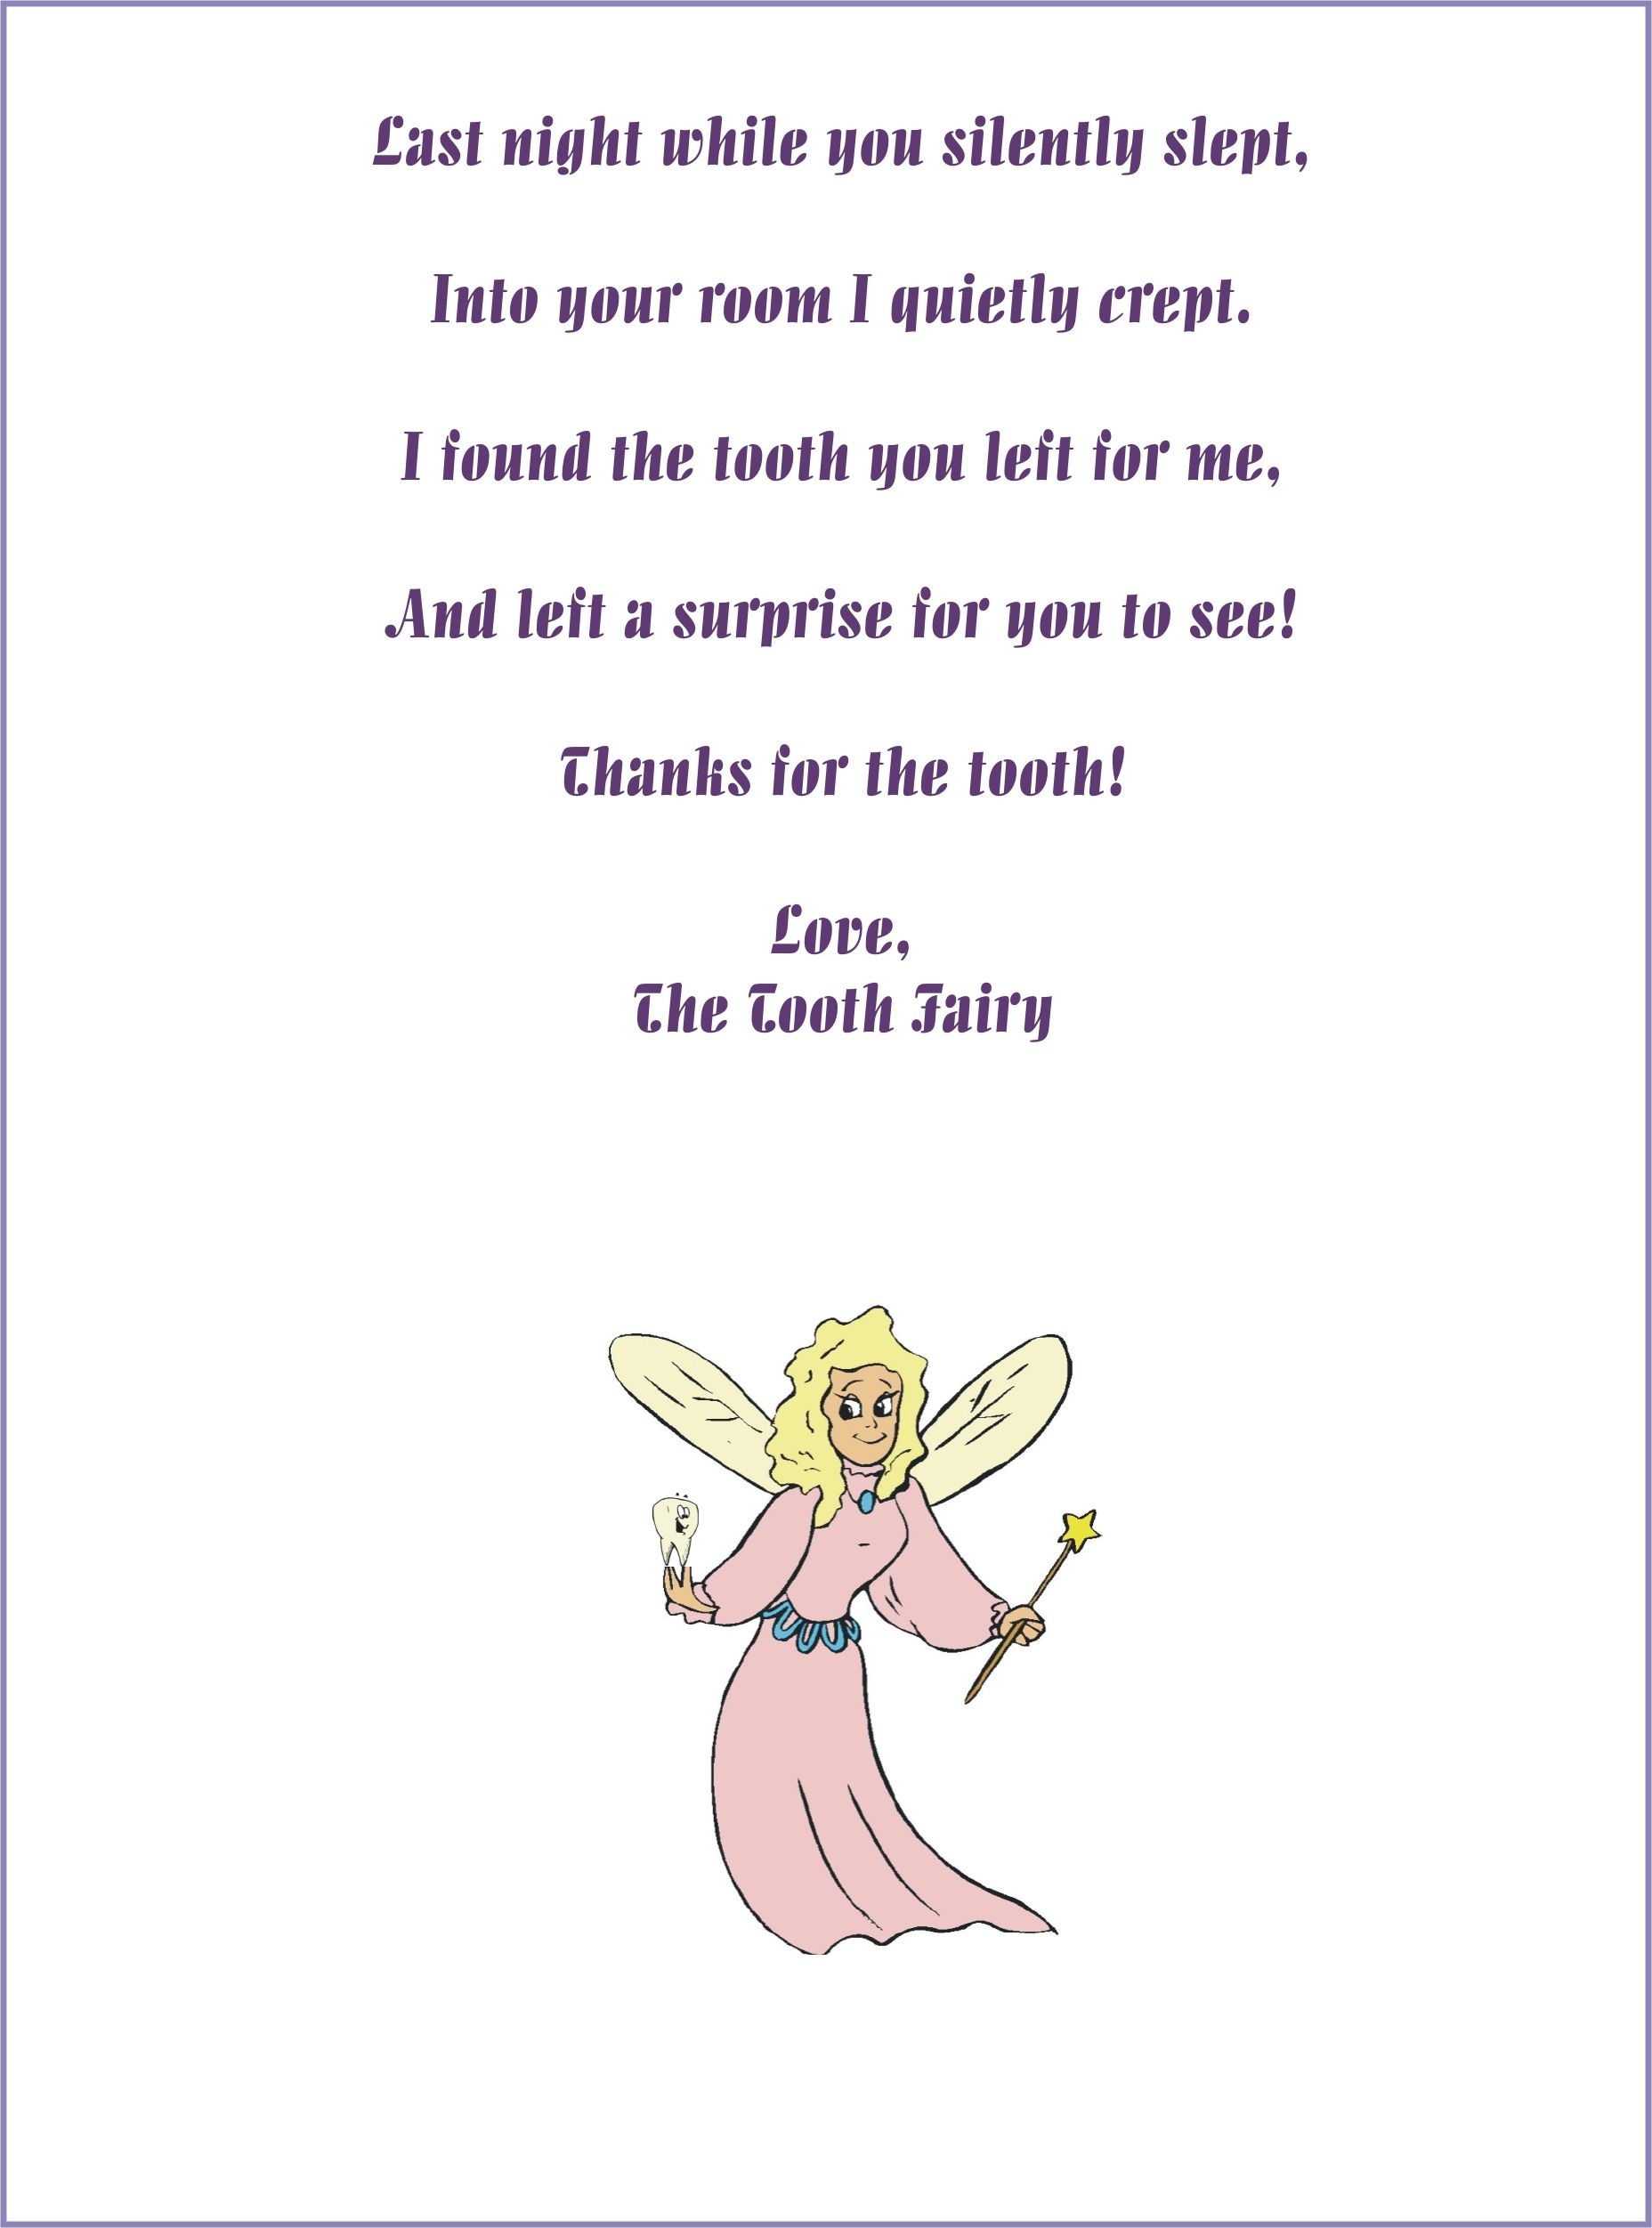 Free Customizable Tooth Fairy Letters! Opens In Word So You Can Type - Tooth Fairy Stationery Free Printable